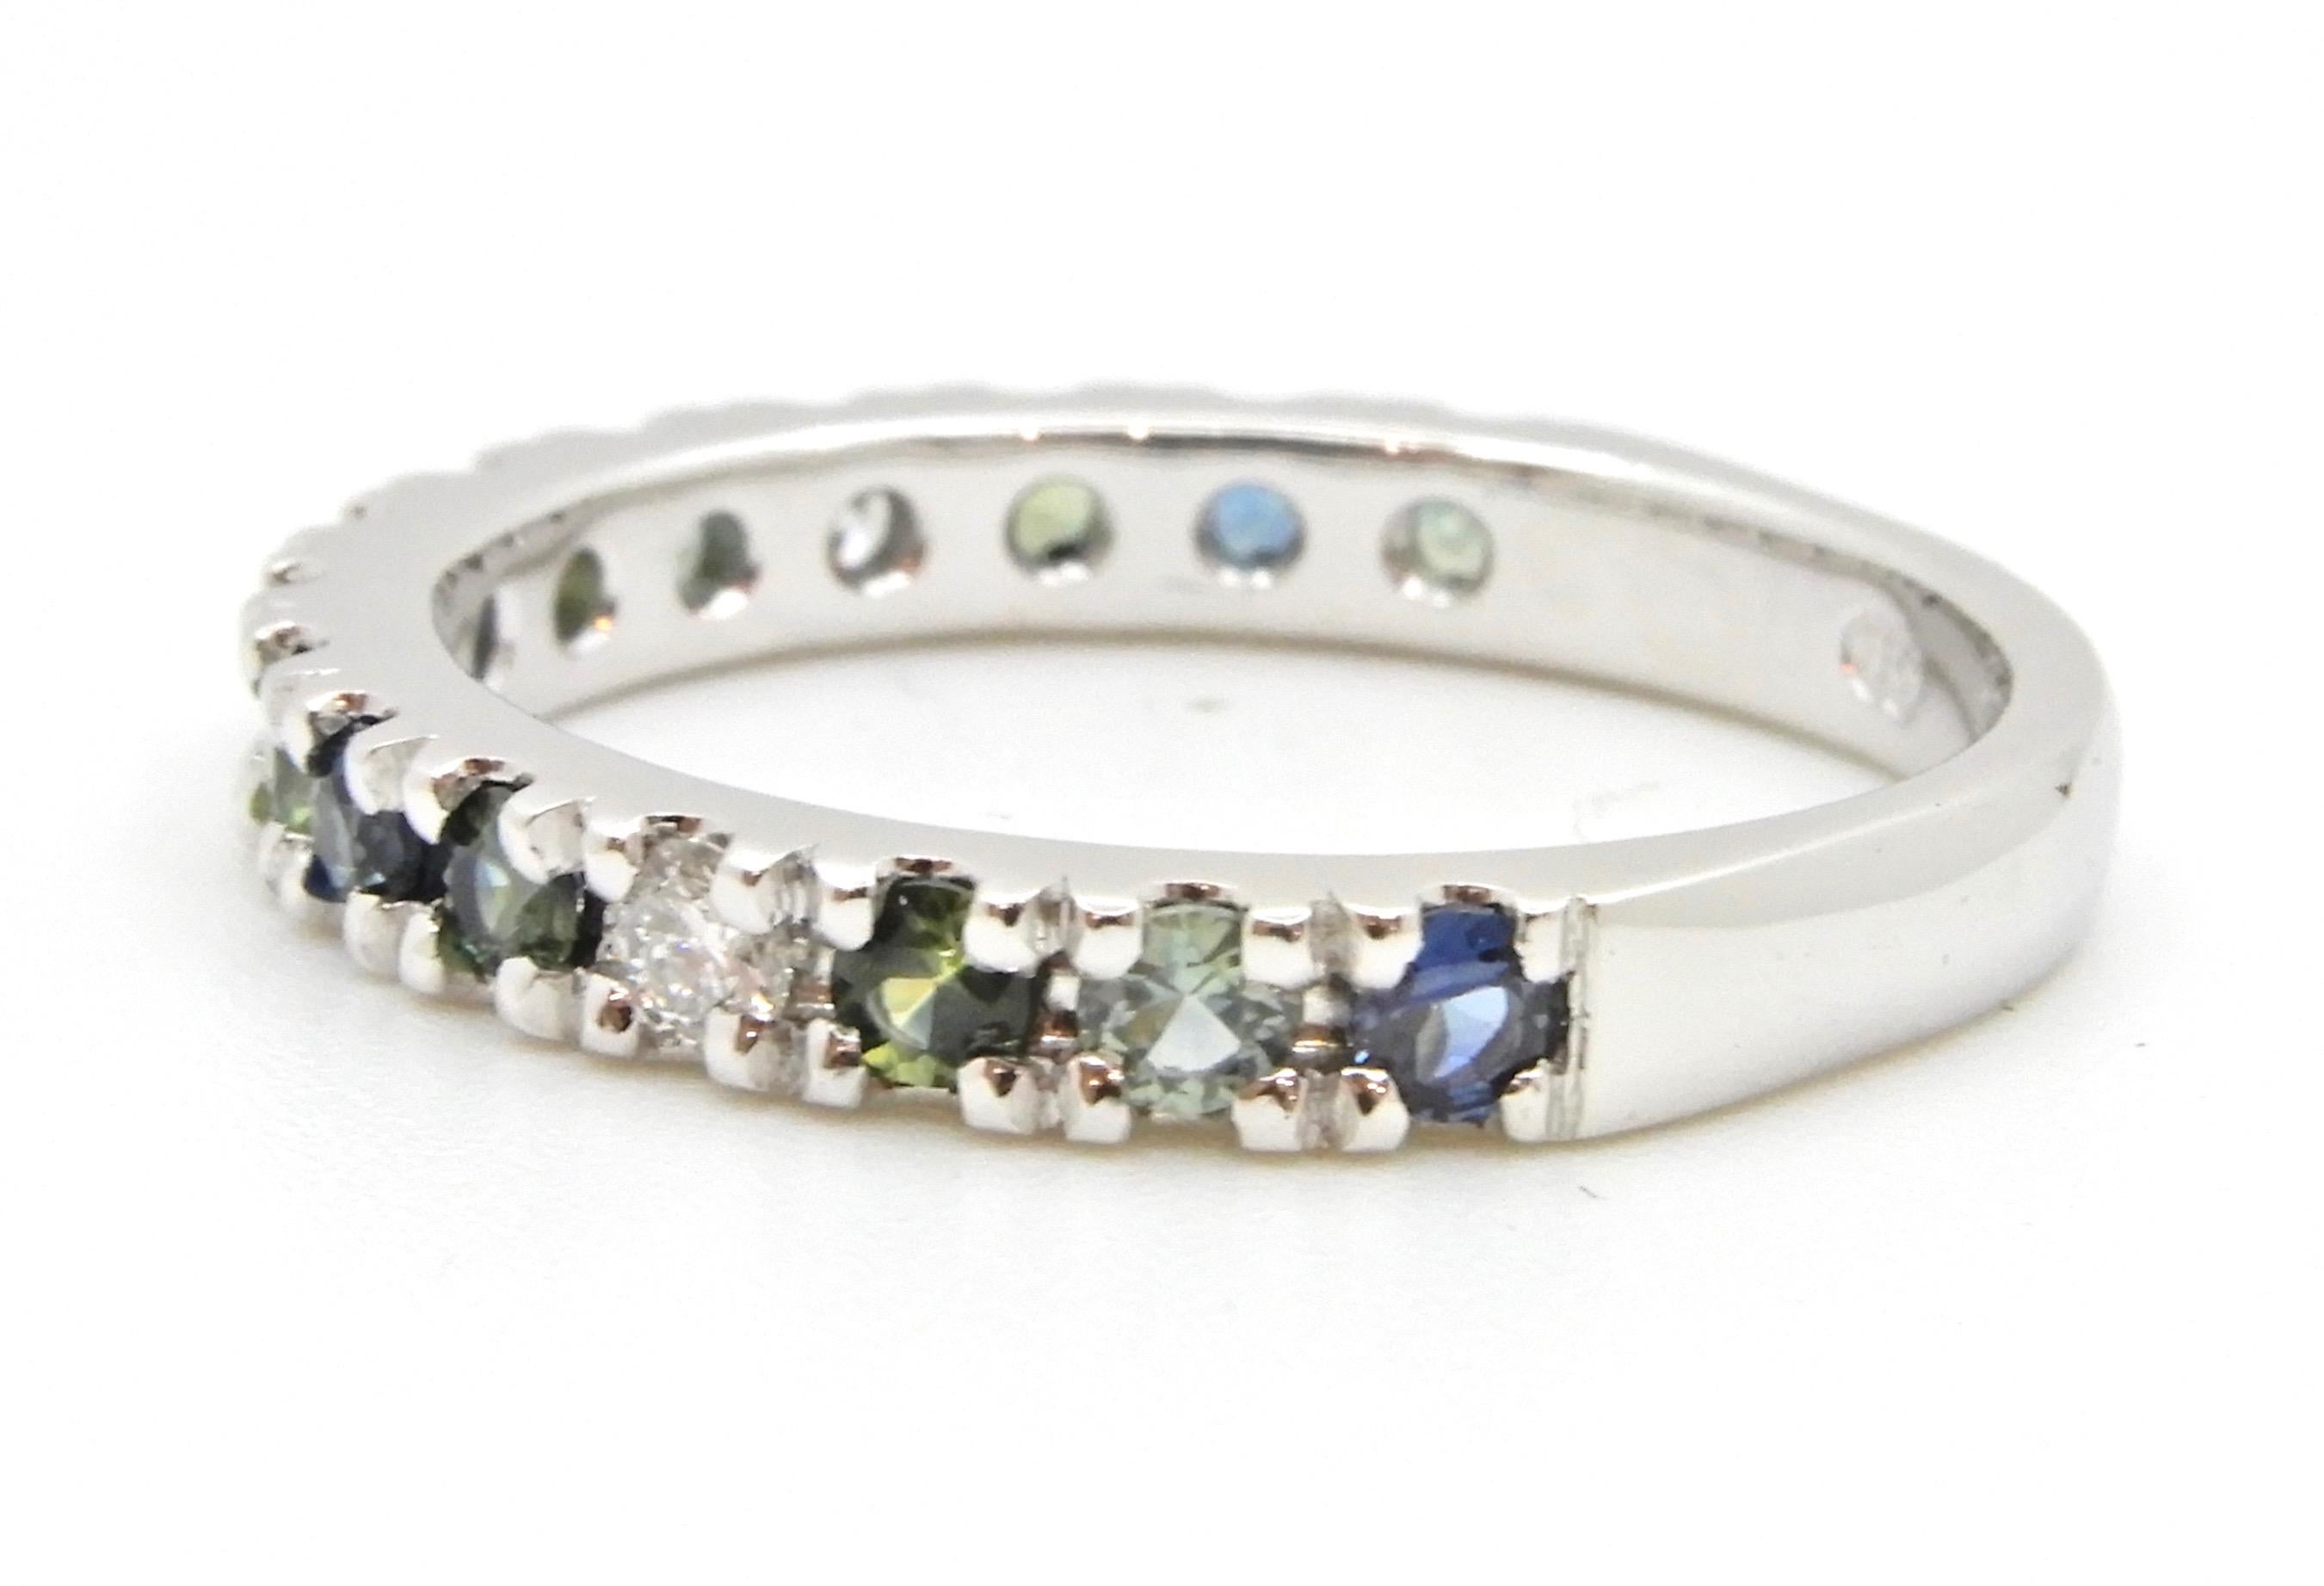 This 0.63 Carat Parti Sapphire and Diamond Wedding Ring is made in the half eternity band style. Set with 3 x 2.25mm (TDW = 0.14 Carat) of G colour SI clarity diamonds and 12 x 2.75mm round brilliant cut parti sapphires in blues and greens.

The